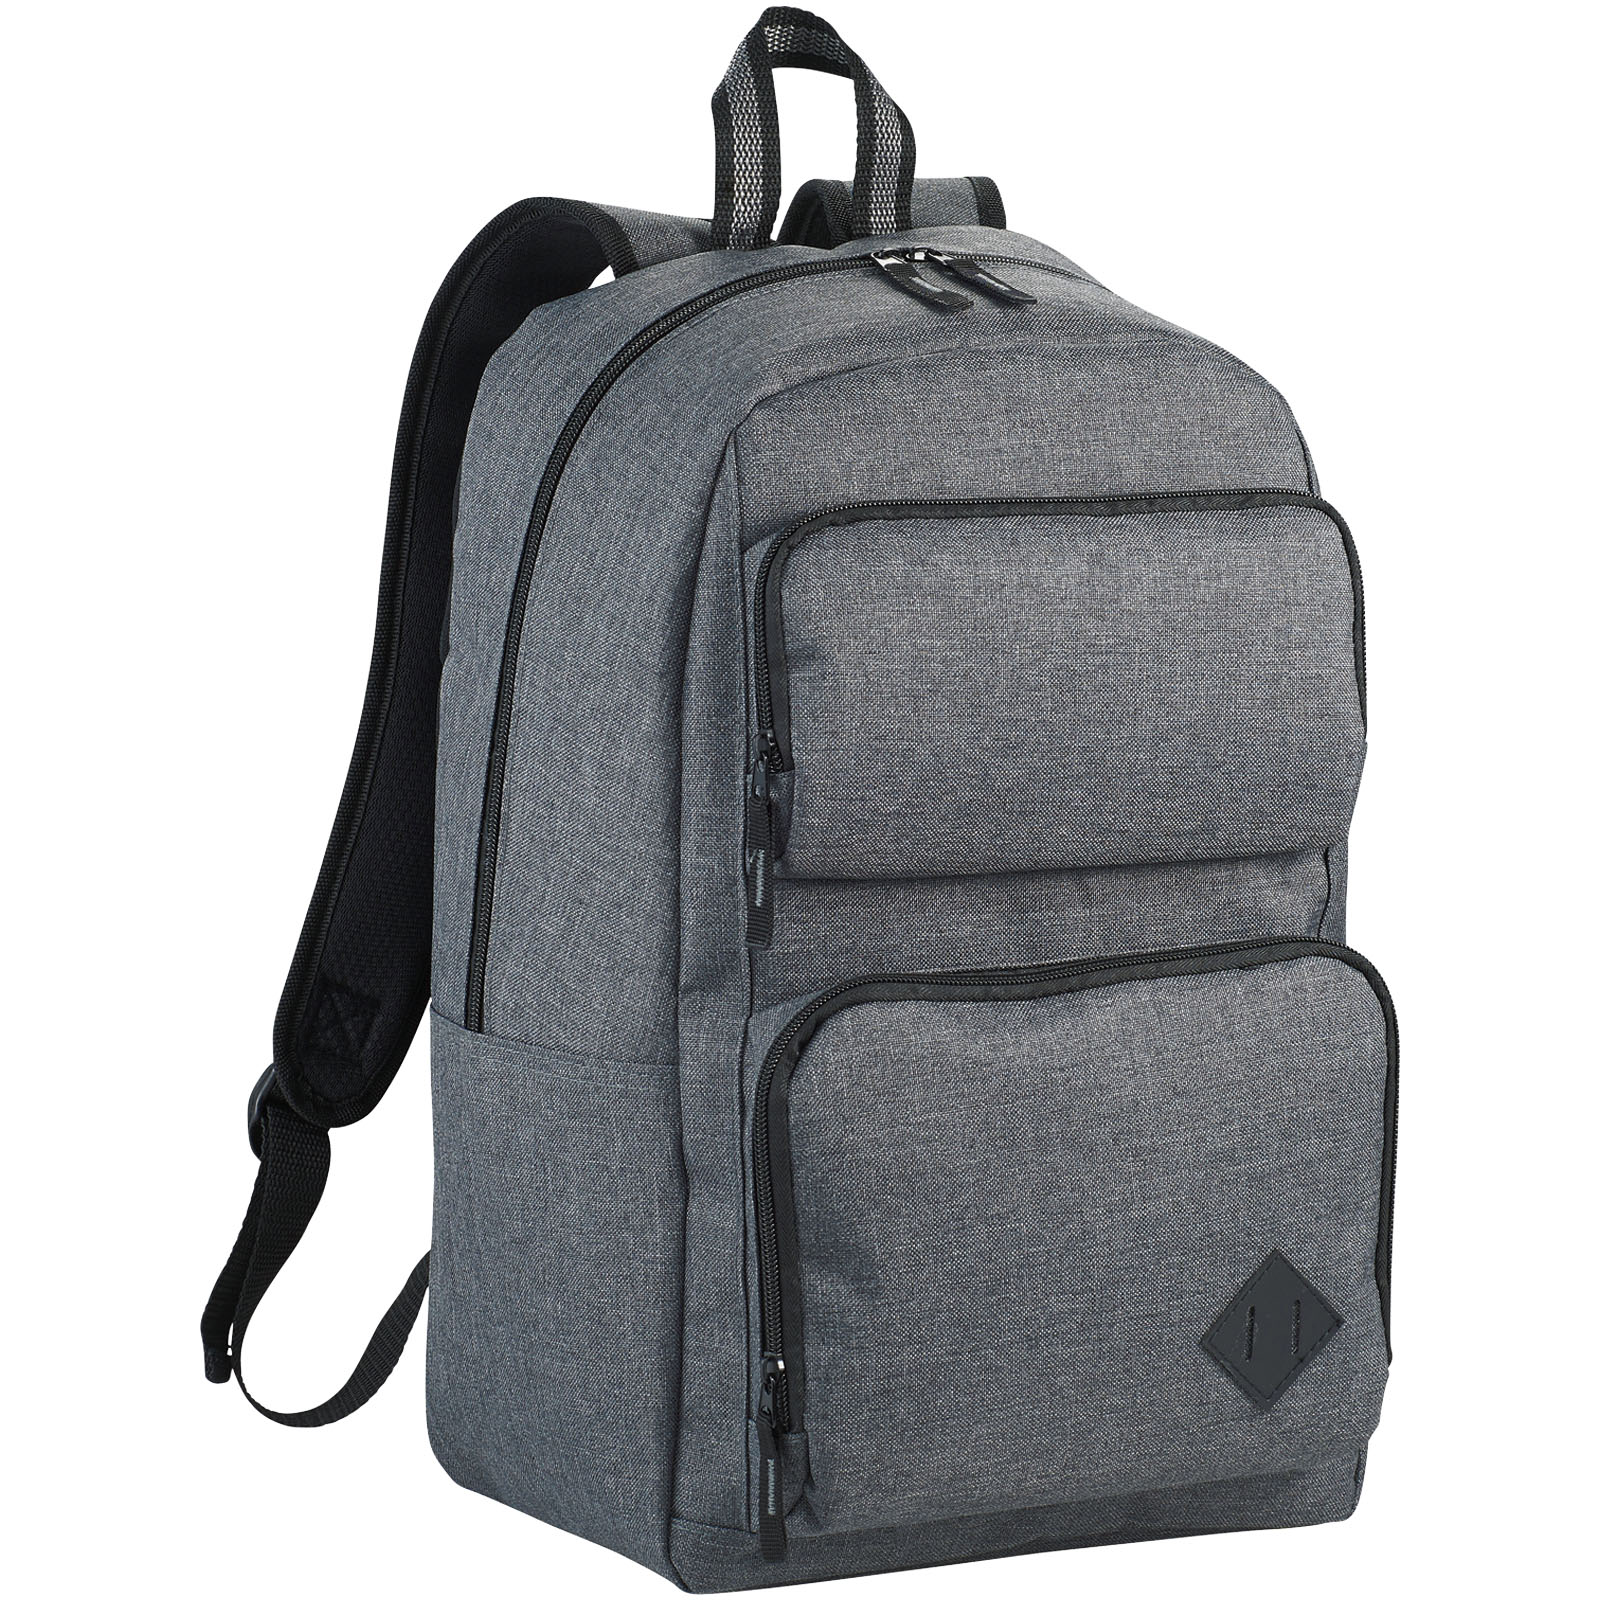 15-inch laptop backpack WACS with special tablet pocket - heather grey